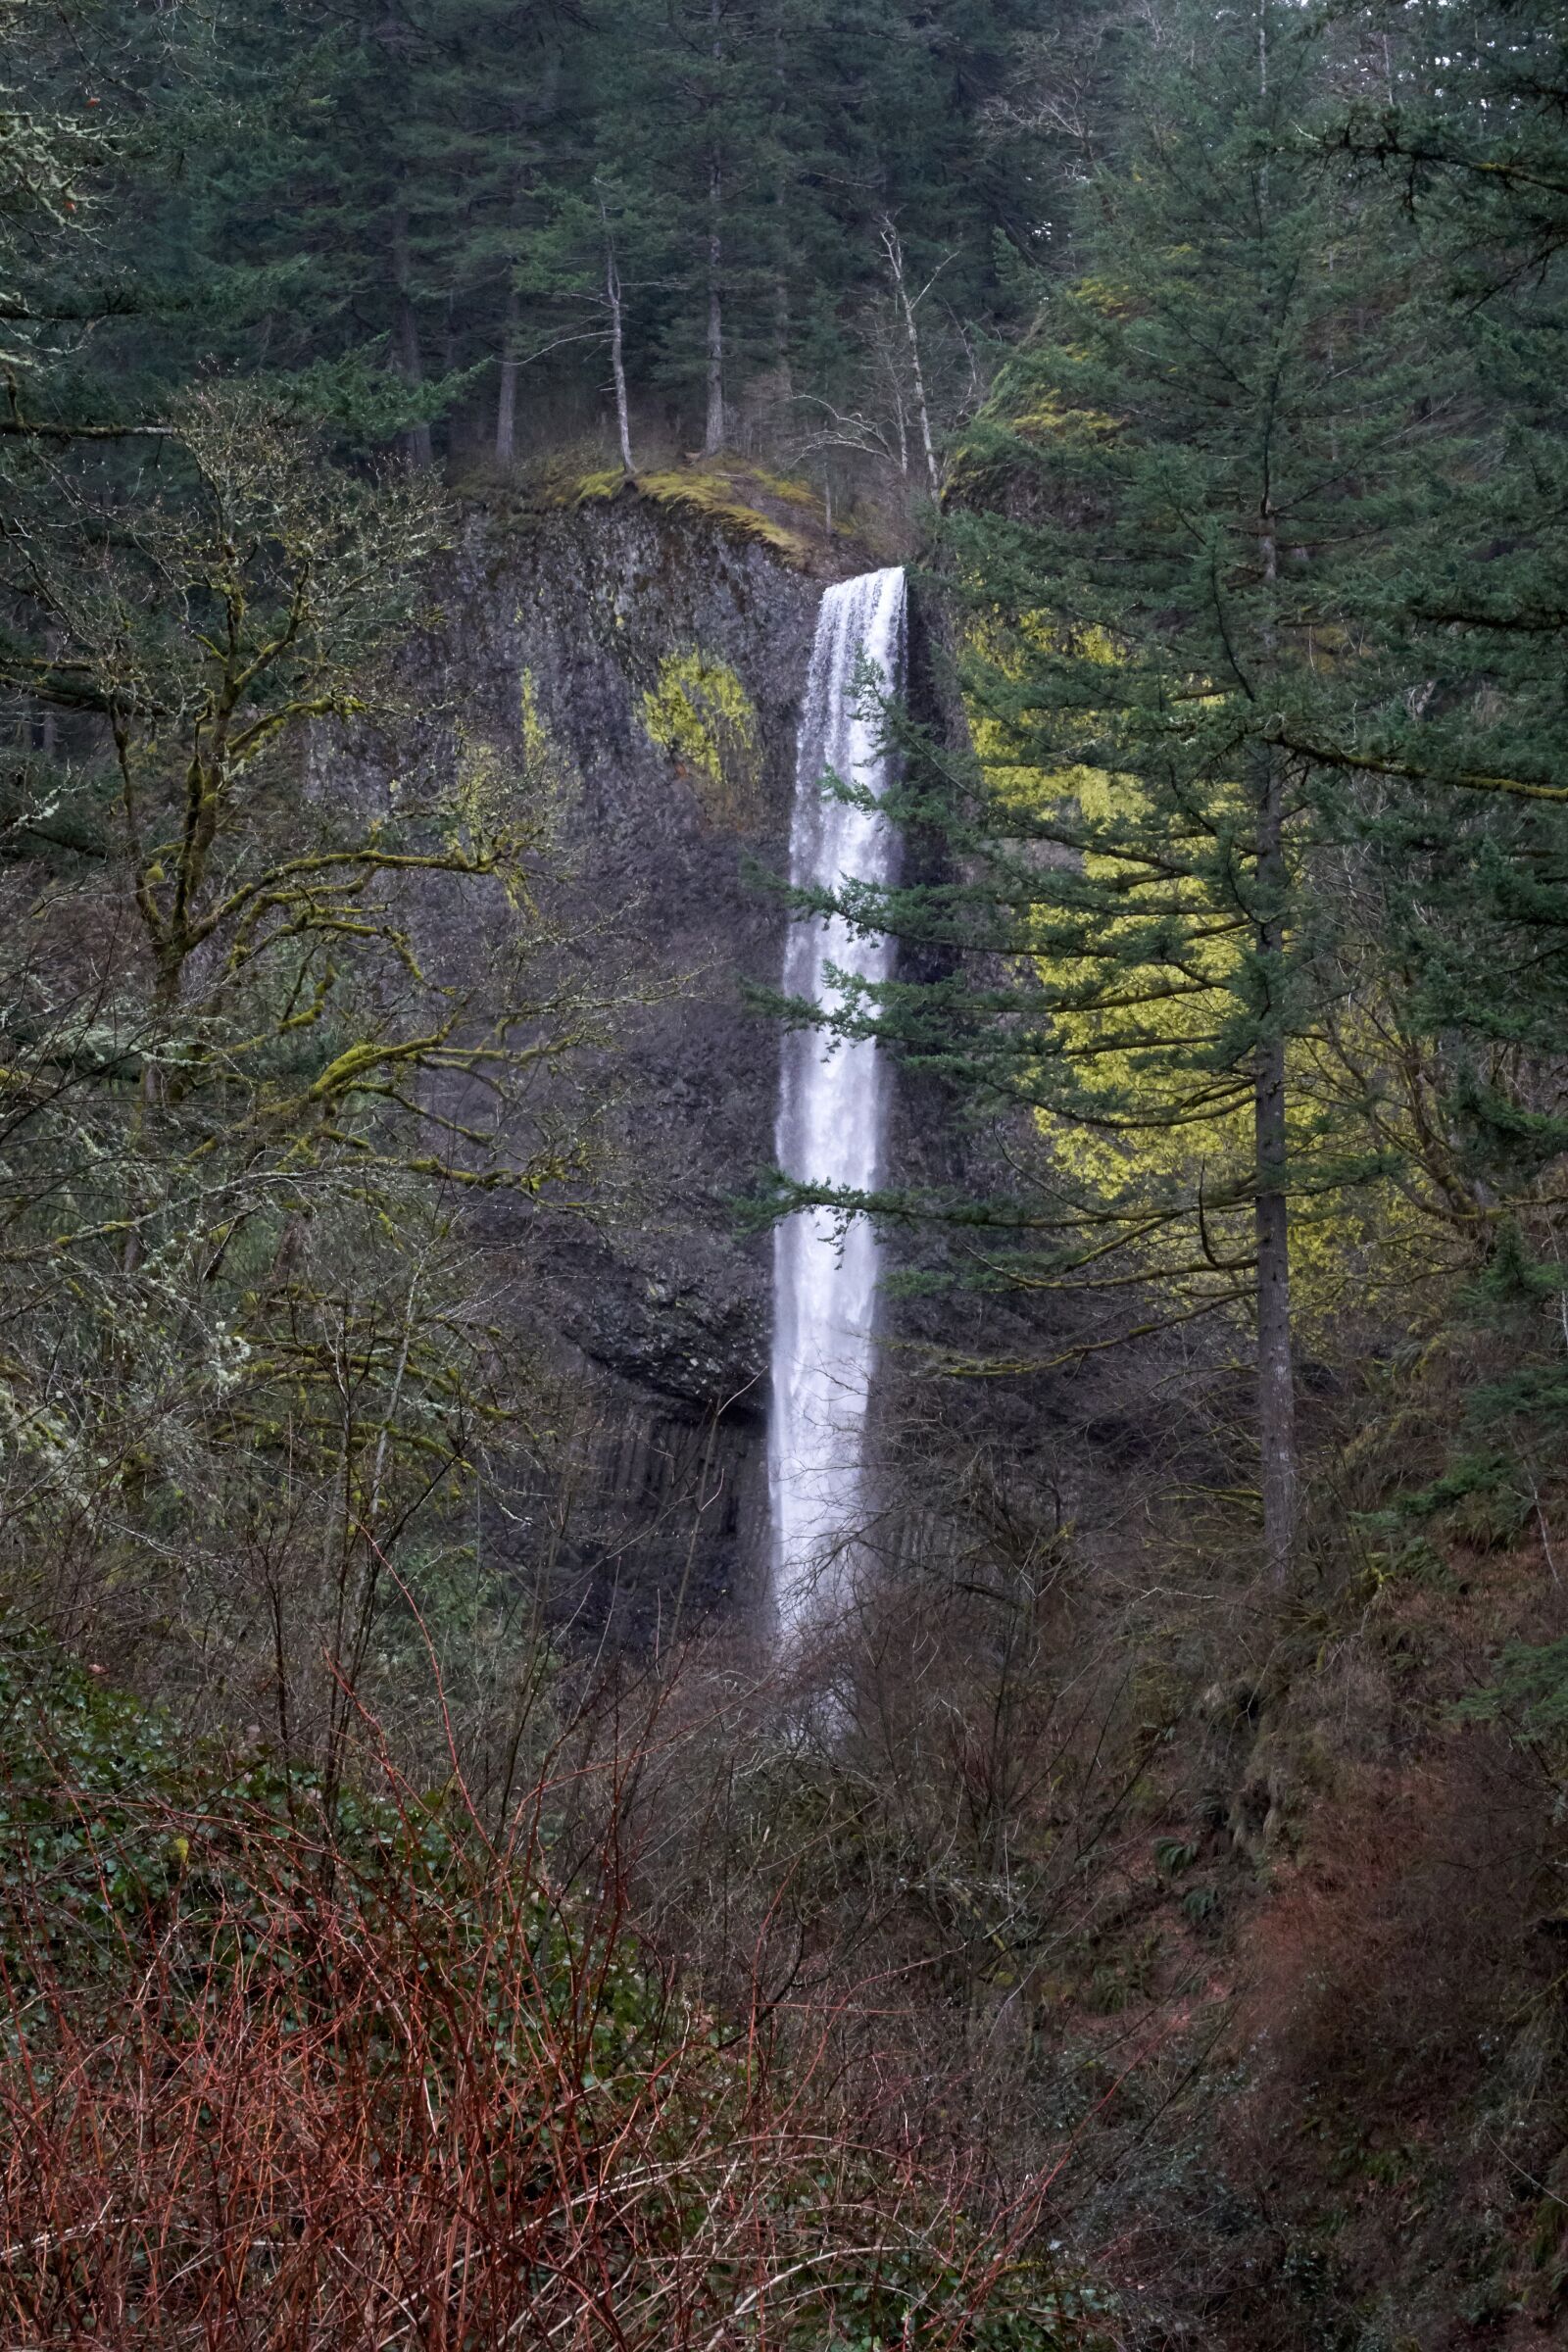 Zeiss Vario-Sonnar T* 24-70 mm F2.8 ZA SSM (SAL2470Z) sample photo. Waterfall, oregon, nature photography